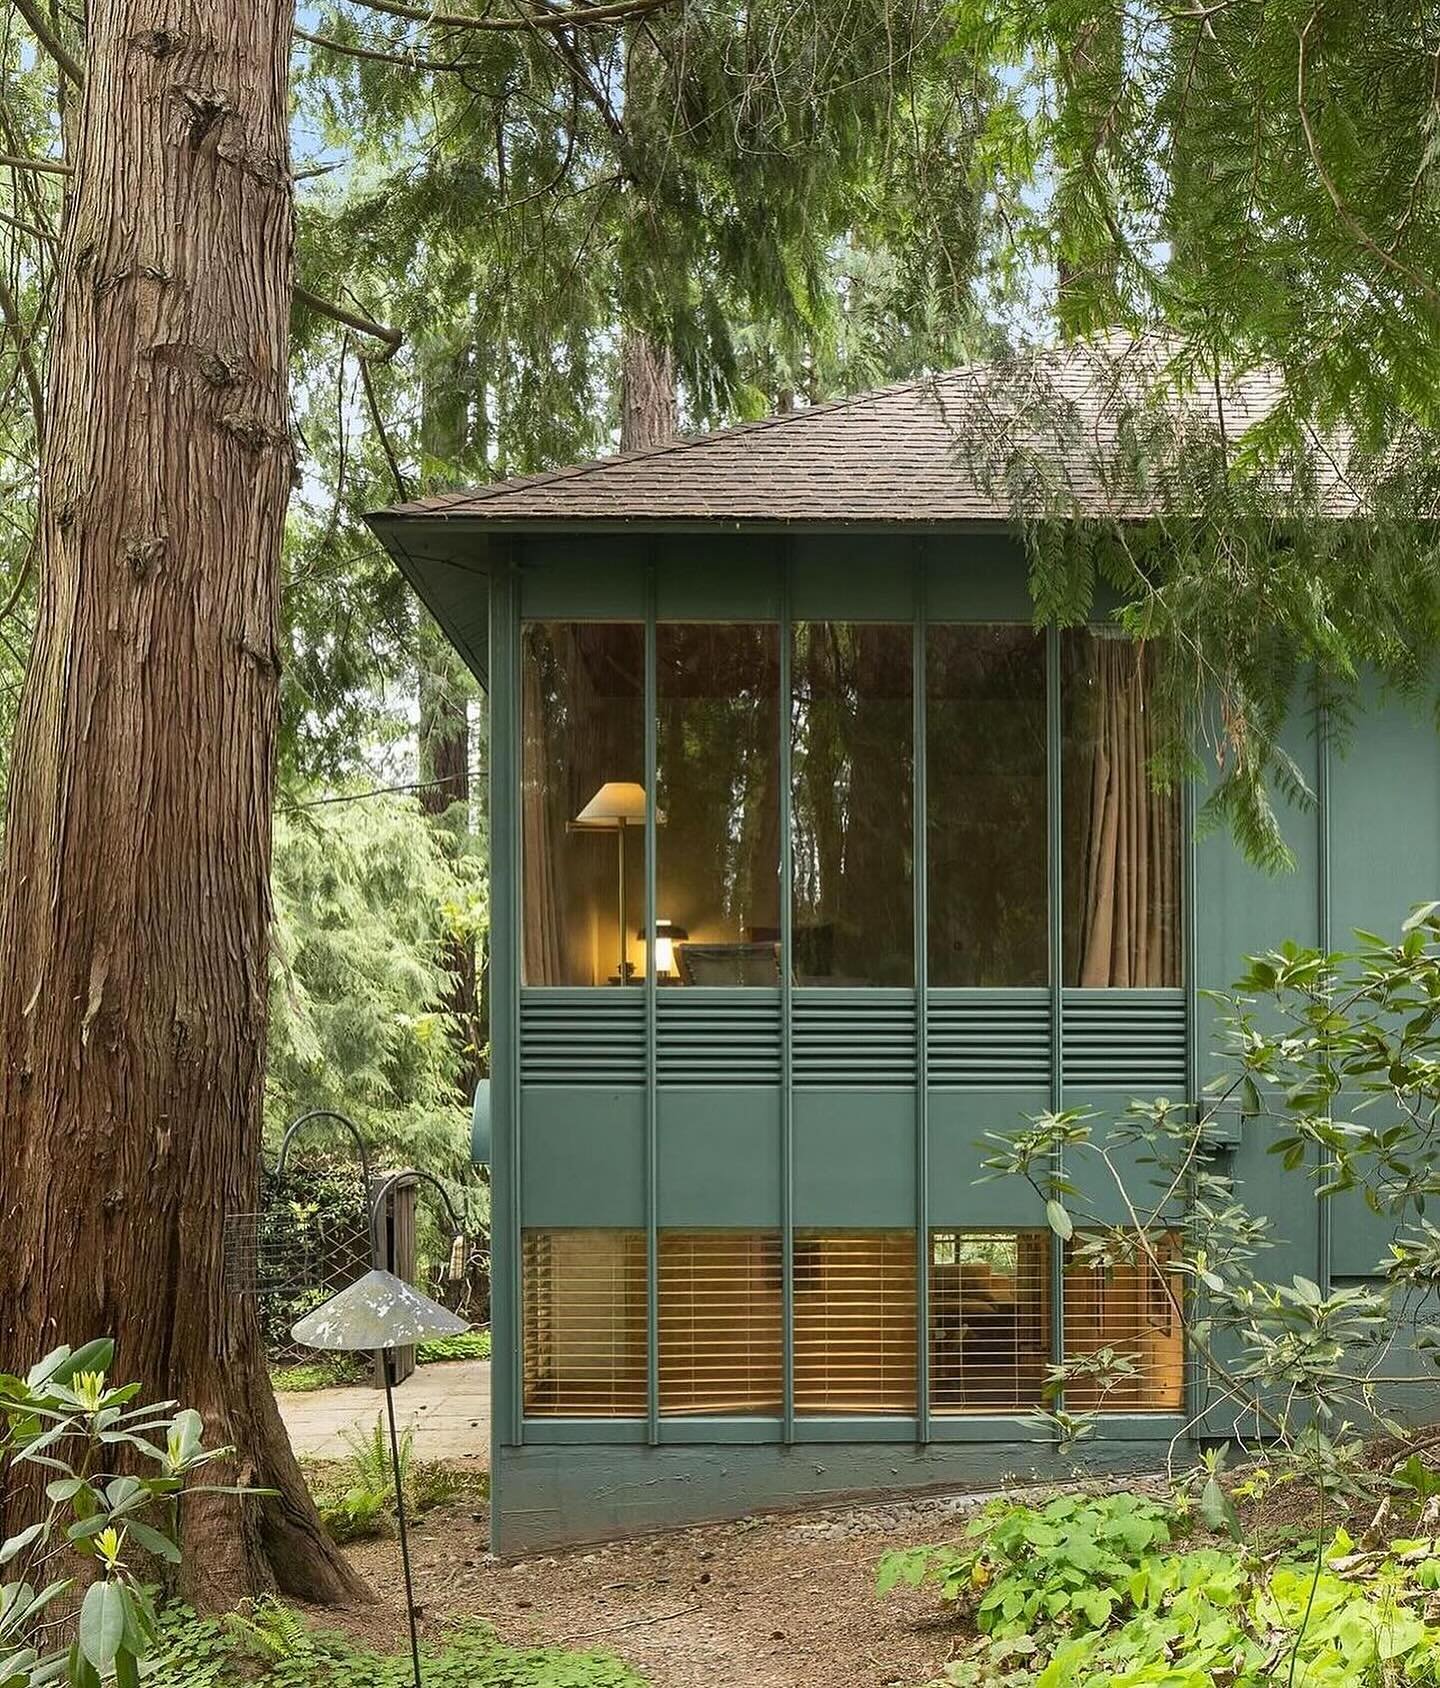 The Jorgensen House by architect John Yeon, 1939 🌿

Founder of the Northwest Regional Style of Modernism. For sale now, listed at $1,679,000 by @modernhomescollective. 

via @thecreativesagent 🤍